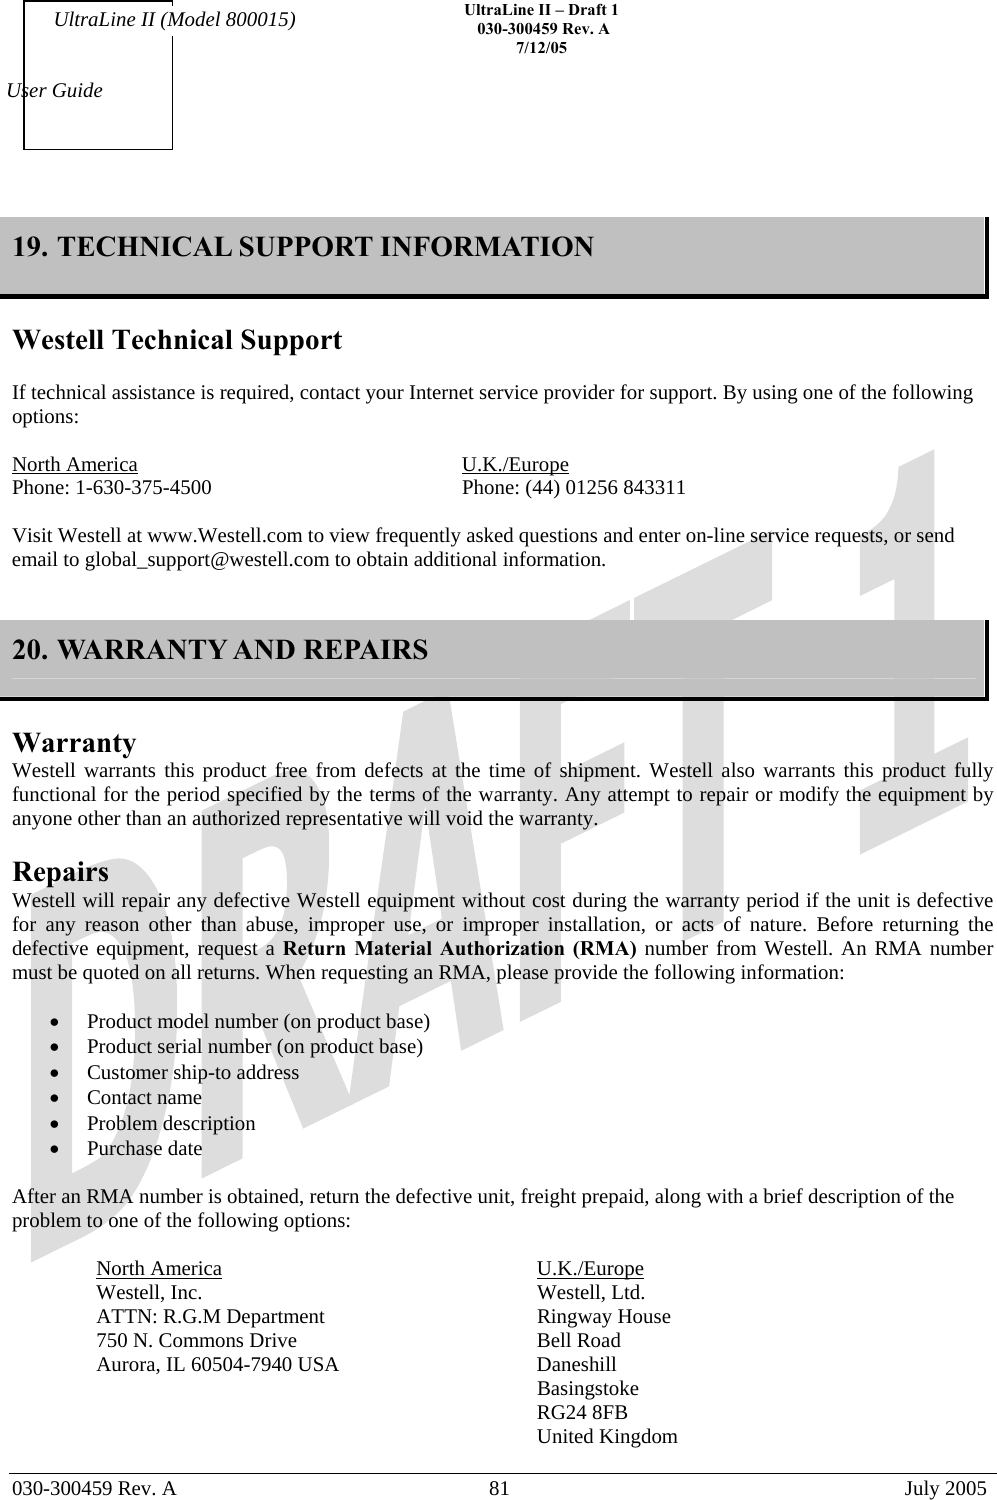    UltraLine II – Draft 1   030-300459 Rev. A 7/12/05   030-300459 Rev. A  81  July 2005  User Guide UltraLine II (Model 800015) 19. TECHNICAL SUPPORT INFORMATION  Westell Technical Support  If technical assistance is required, contact your Internet service provider for support. By using one of the following options:  North America     U.K./Europe Phone: 1-630-375-4500        Phone: (44) 01256 843311  Visit Westell at www.Westell.com to view frequently asked questions and enter on-line service requests, or send email to global_support@westell.com to obtain additional information.   20. WARRANTY AND REPAIRS  Warranty Westell warrants this product free from defects at the time of shipment. Westell also warrants this product fully functional for the period specified by the terms of the warranty. Any attempt to repair or modify the equipment by anyone other than an authorized representative will void the warranty.  Repairs Westell will repair any defective Westell equipment without cost during the warranty period if the unit is defective for any reason other than abuse, improper use, or improper installation, or acts of nature. Before returning the defective equipment, request a Return Material Authorization (RMA) number from Westell. An RMA number must be quoted on all returns. When requesting an RMA, please provide the following information:  •  Product model number (on product base) •  Product serial number (on product base) •  Customer ship-to address •  Contact name •  Problem description •  Purchase date  After an RMA number is obtained, return the defective unit, freight prepaid, along with a brief description of the problem to one of the following options:  North America     U.K./Europe Westell, Inc.     Westell, Ltd.      ATTN: R.G.M Department      Ringway House 750 N. Commons Drive        Bell Road Aurora, IL 60504-7940 USA      Daneshill       Basingstoke       RG24 8FB       United Kingdom  